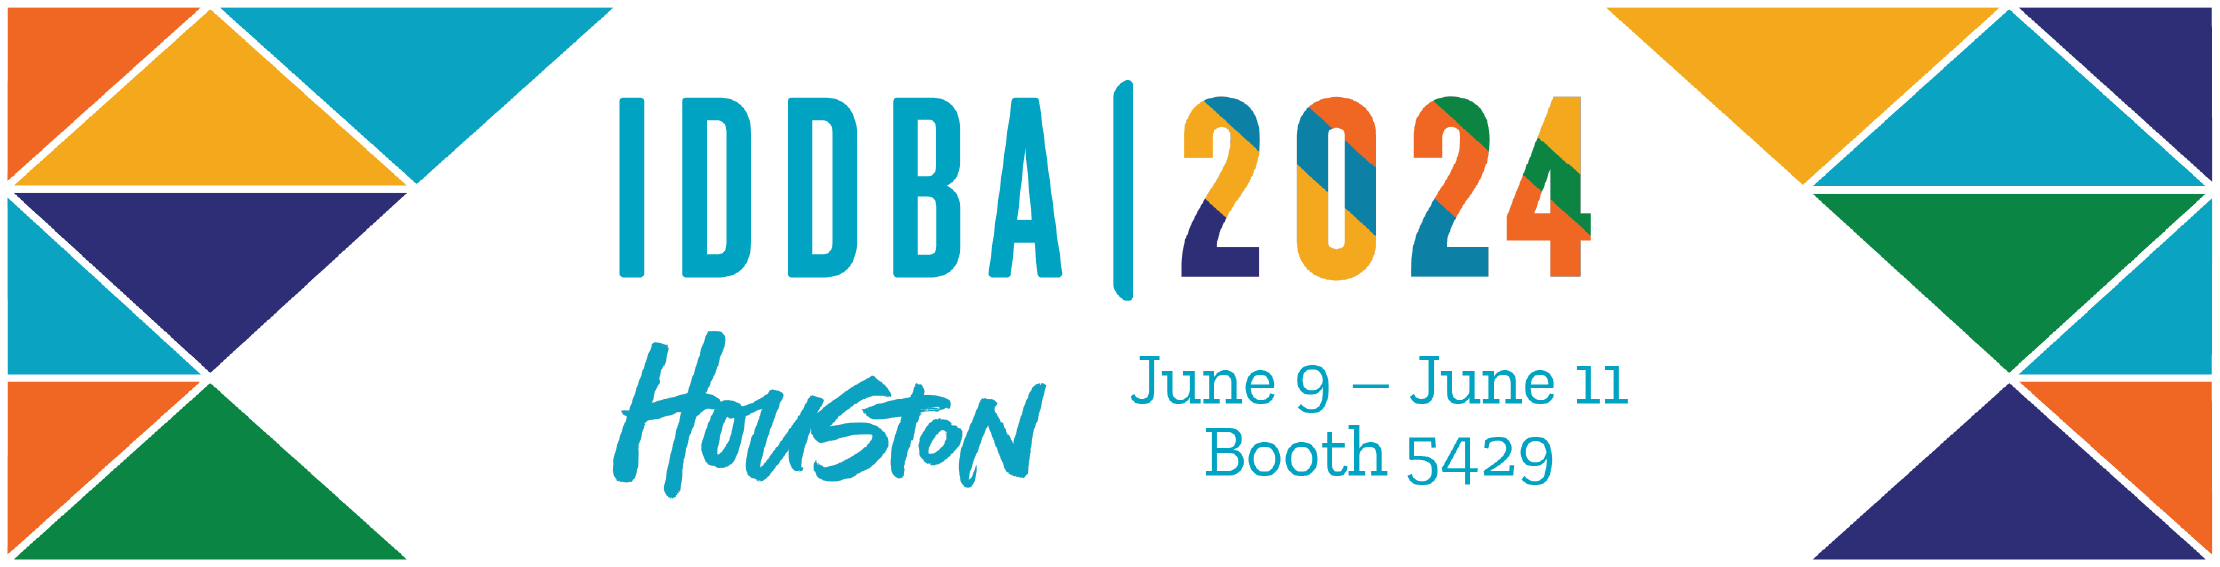 Come visit us at the IDDBA 2024 show - Booth 5429